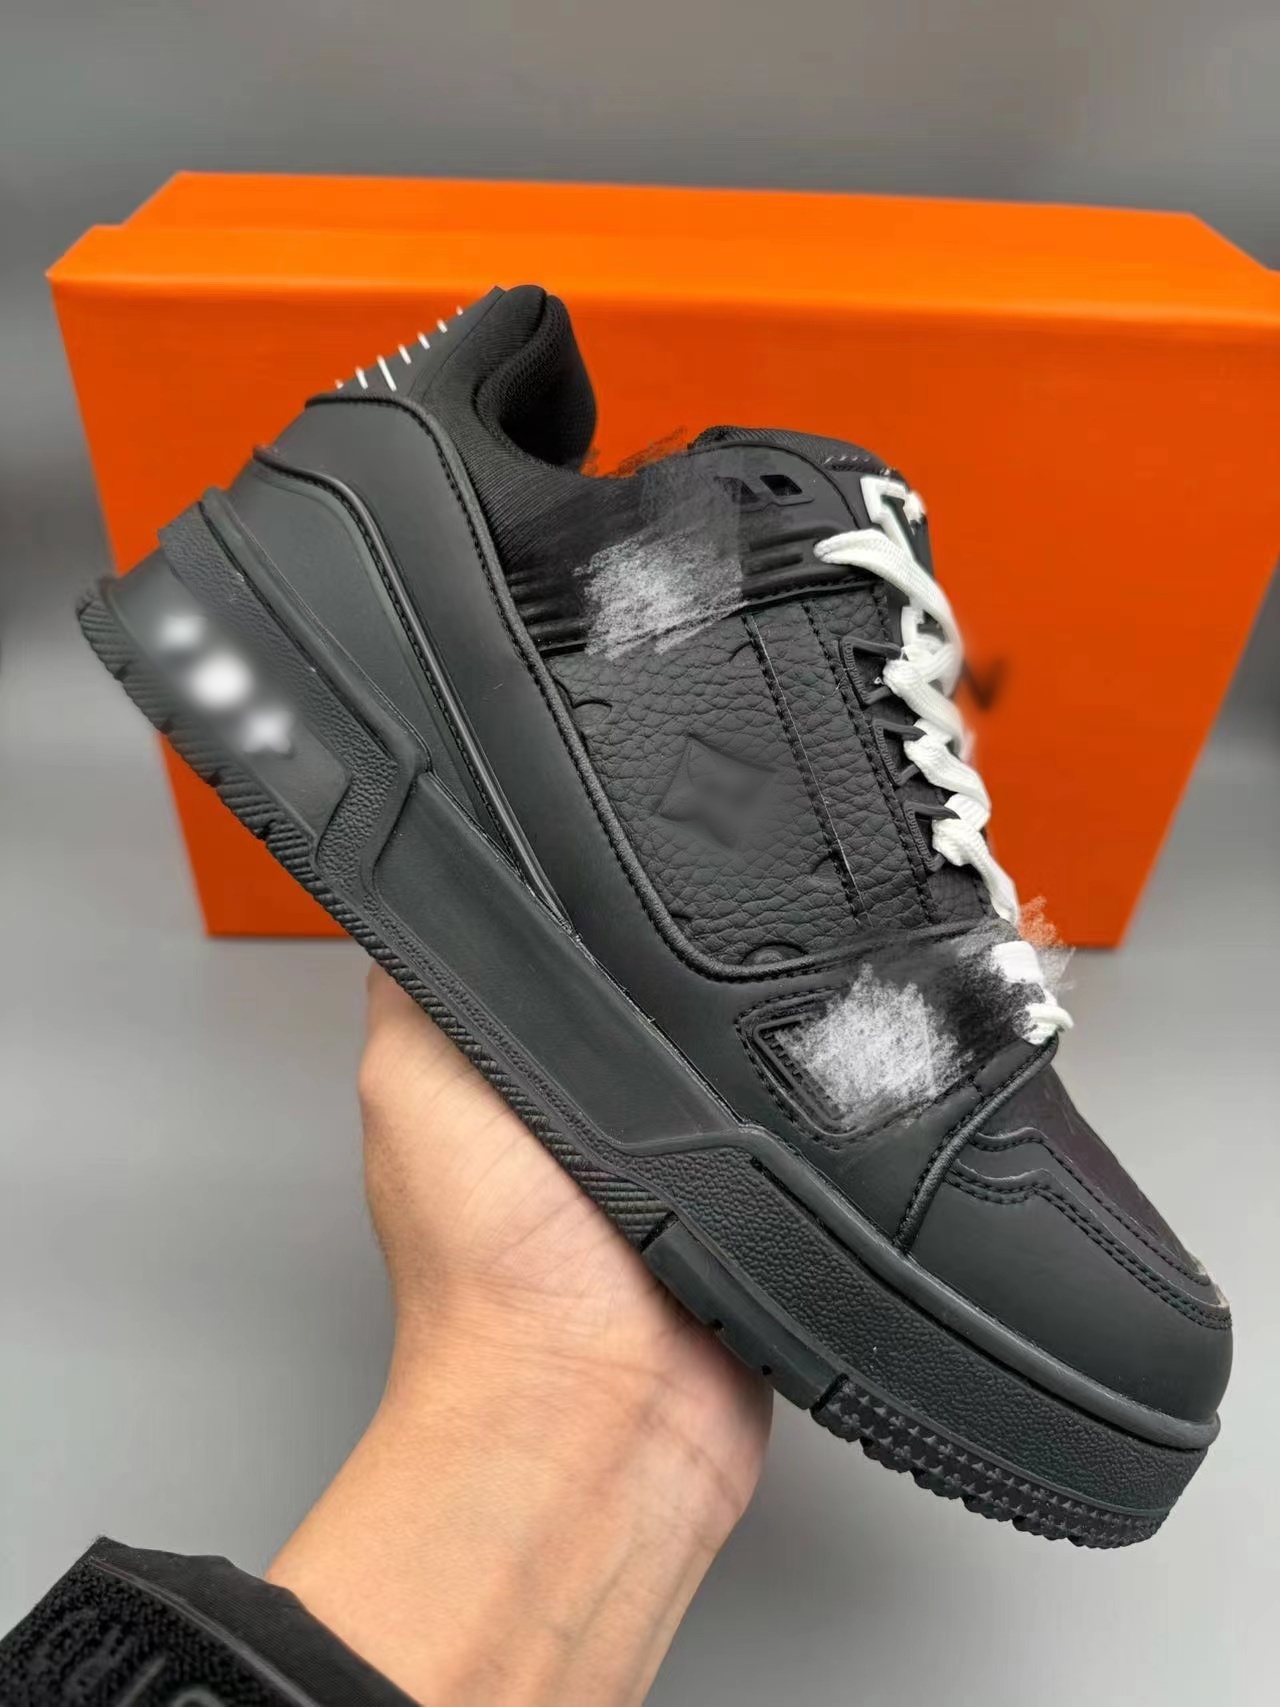 New designer shoes sneaker scasual shoes for men Running Shoes trainer Outdoor Shoes trainers shoe high quality Platform Shoes Calfskin Leather Abloh Overlays tn